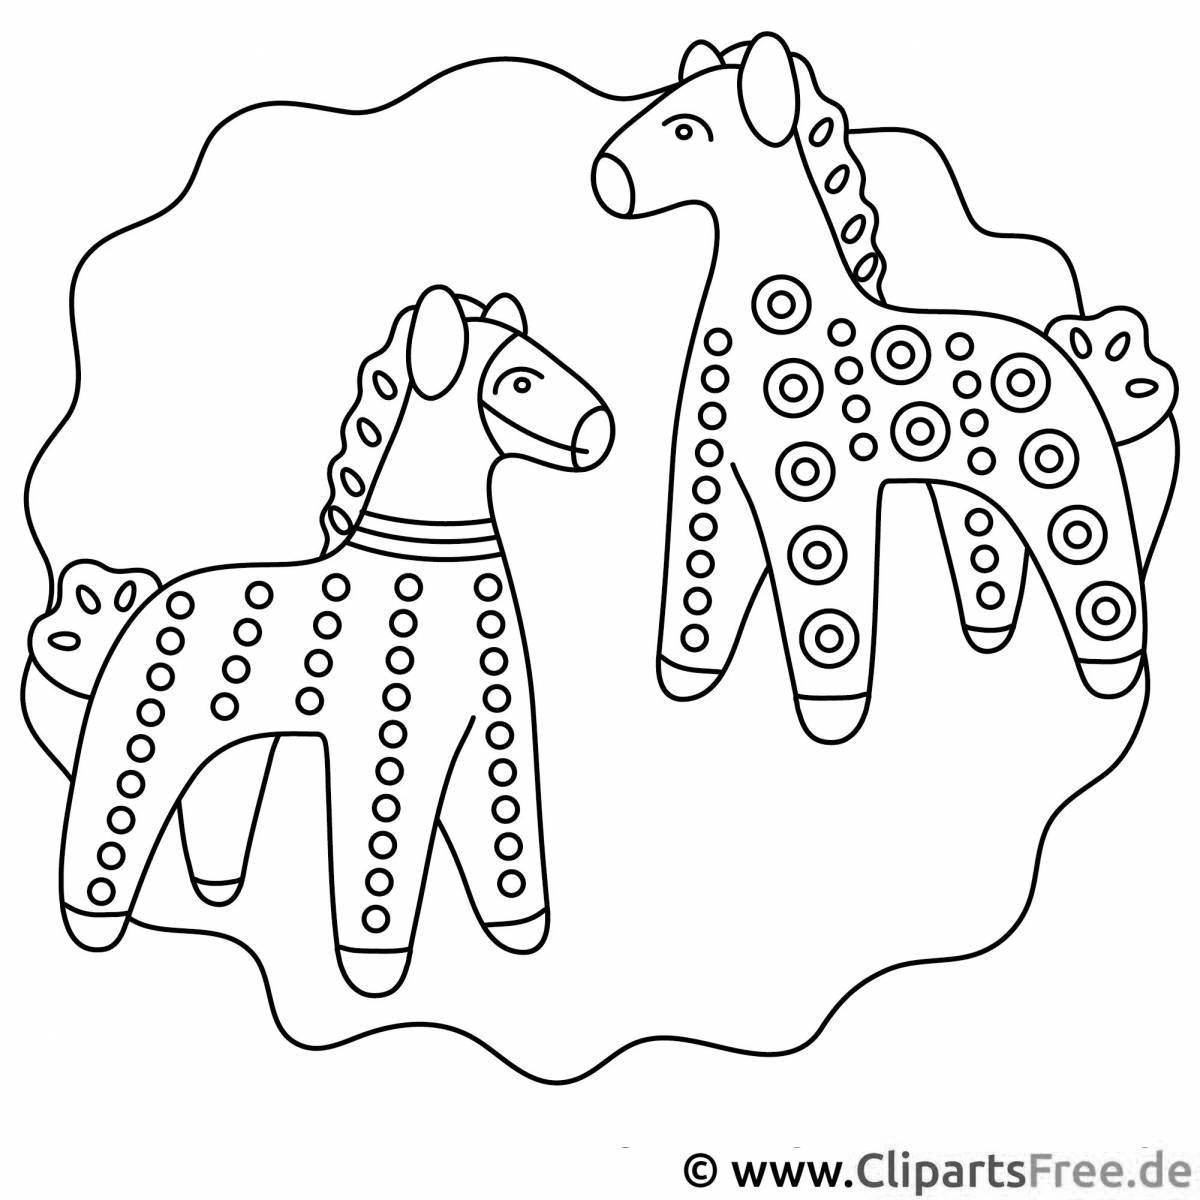 Charming coloring book for kids philemon horse